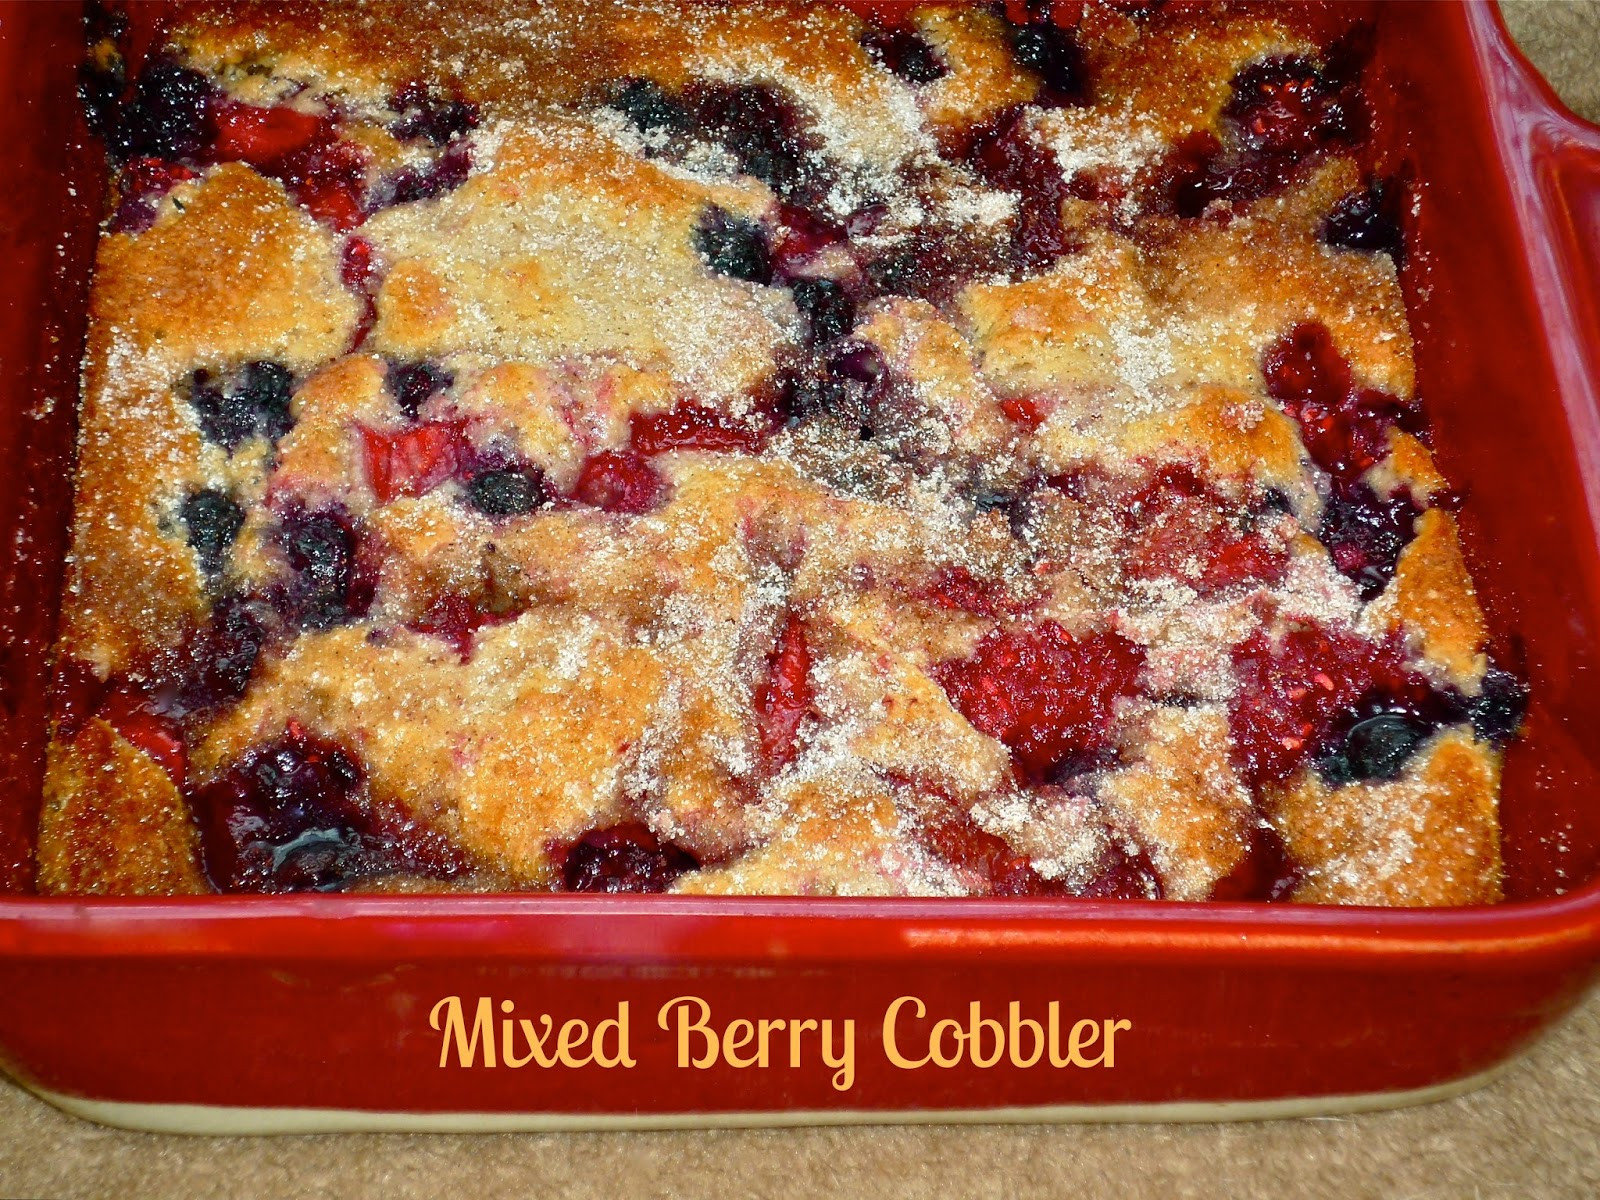 Mixed Berry Desserts
 The Weekend Gourmet July Secret Recipe Club Featuring